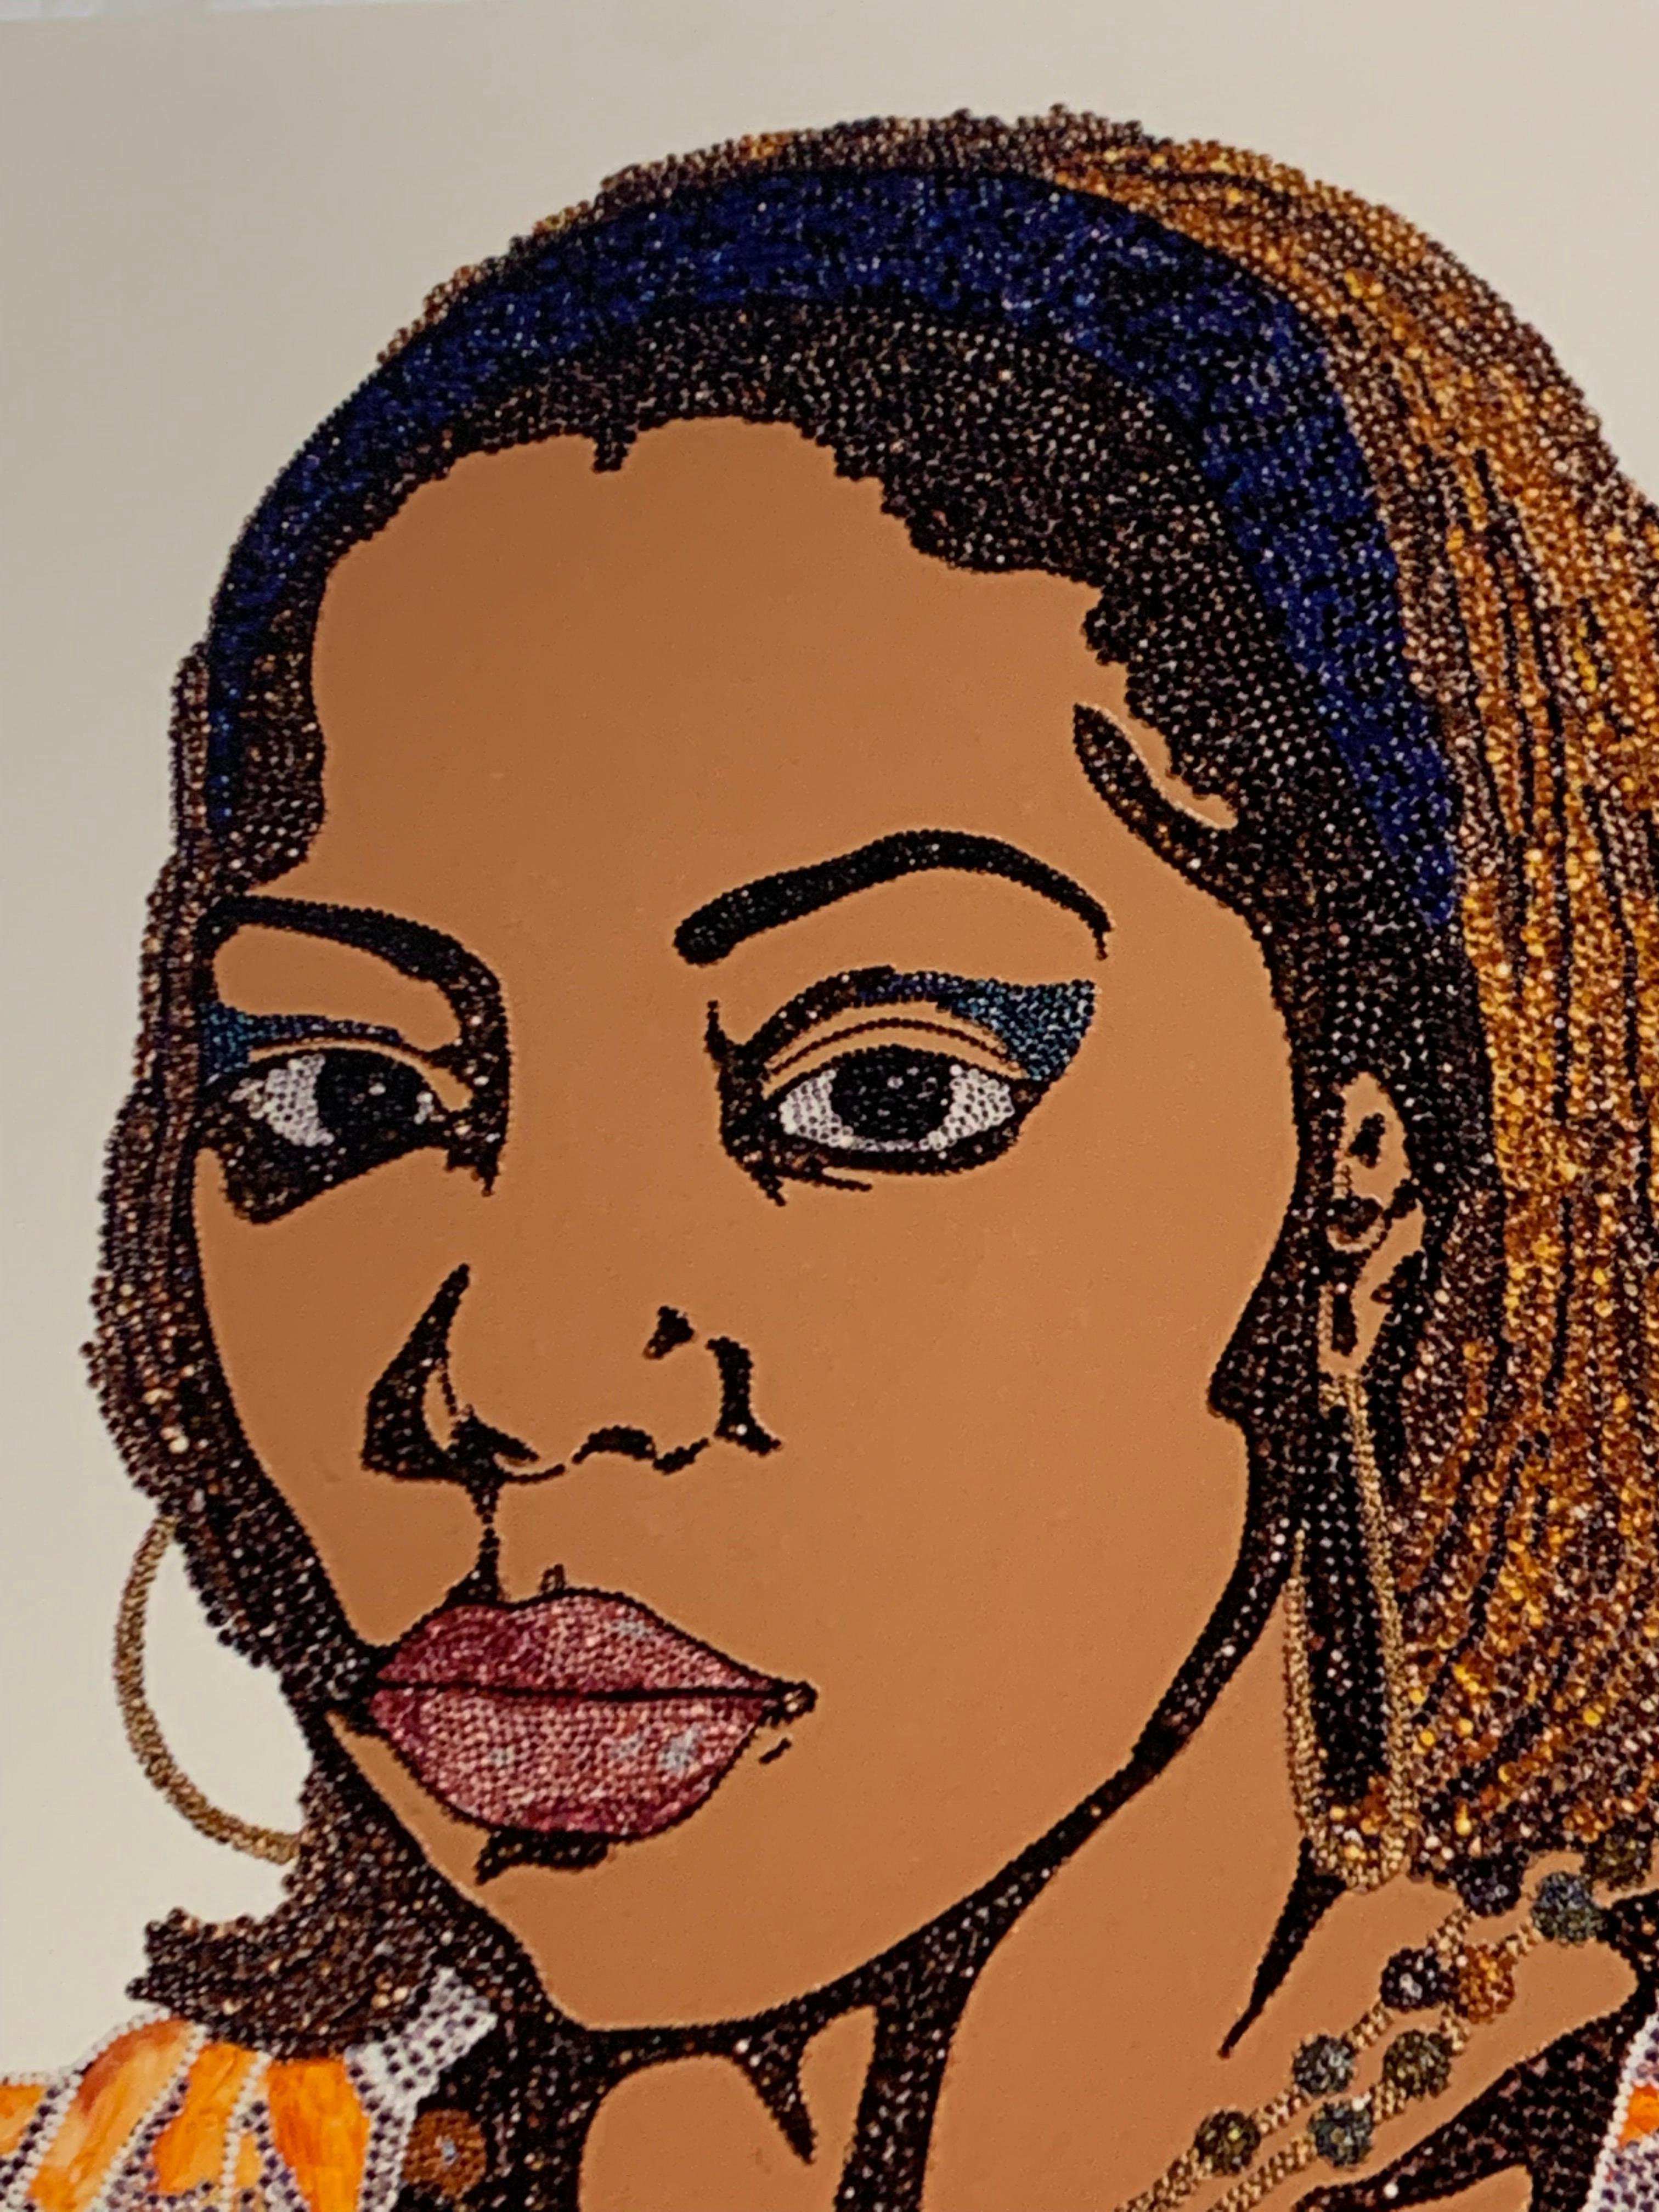 Mickalene Thomas
Portrait of a Lovely Six Foota #1, 2009, (24/50 + 5 AP)
Archival Pigment Print
14 x 11 in

Published by The Lapis Press, to benefit the Institute of Contemporary Art, Los Angeles (formerly the Santa Monica Museum of Art)